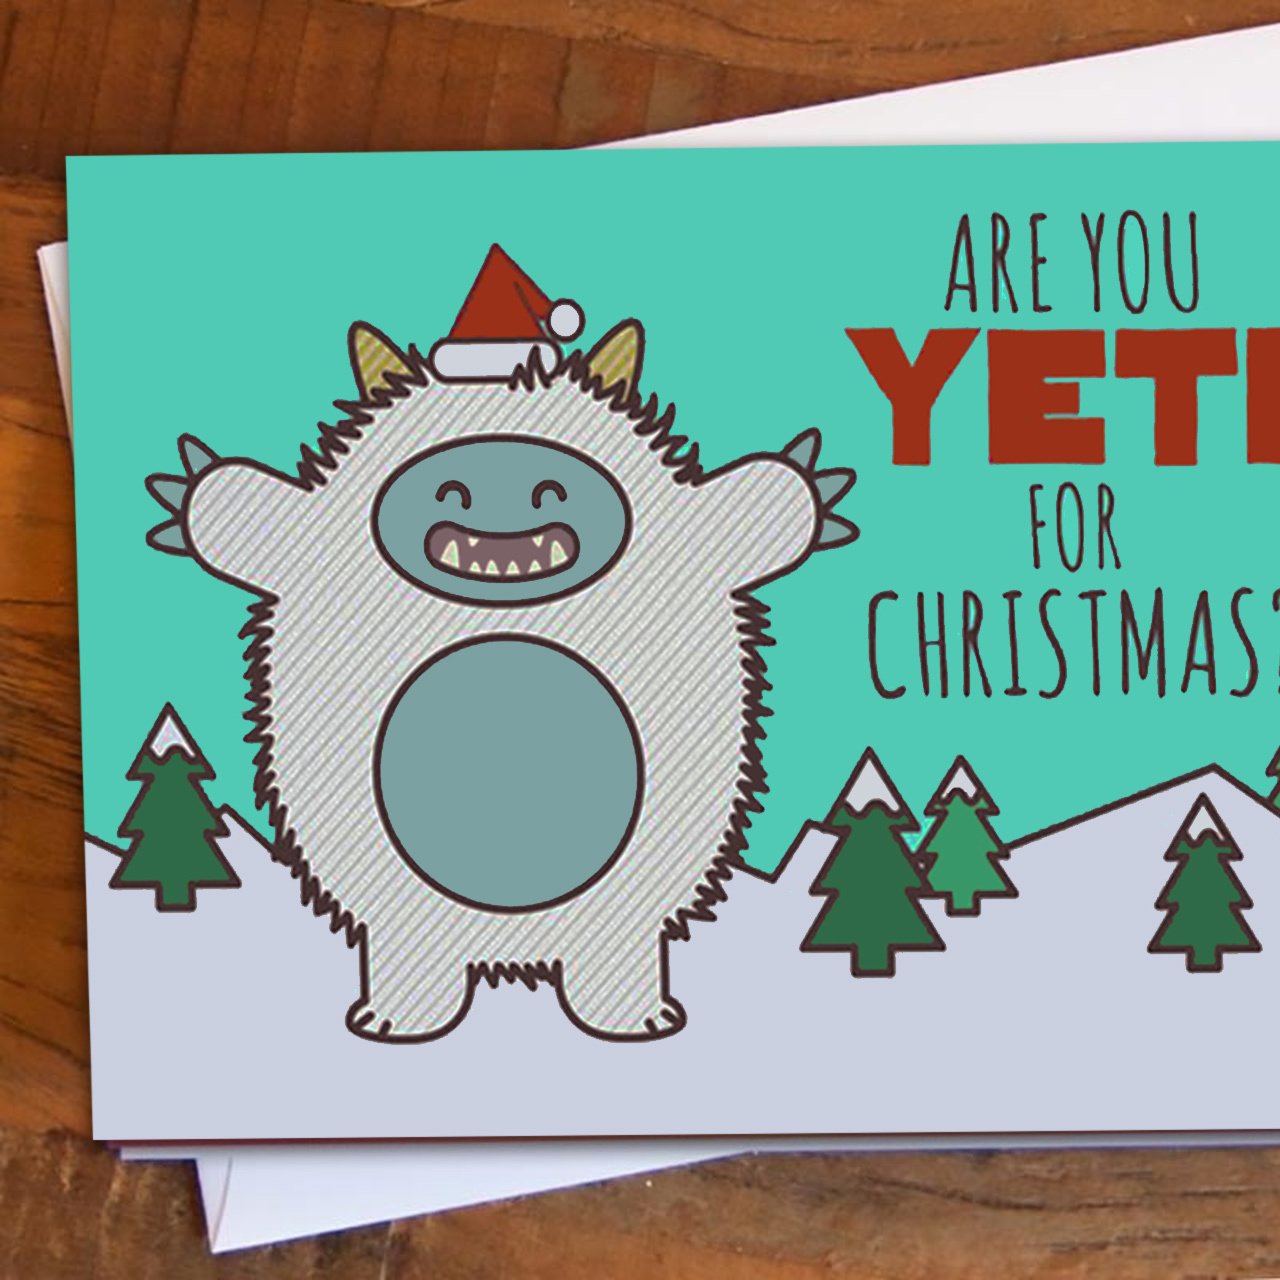 https://cdn.shopify.com/s/files/1/0574/0888/0830/products/unique-gift-are-you-yeti-for-christmas-holiday-card-2.jpg?v=1700240101